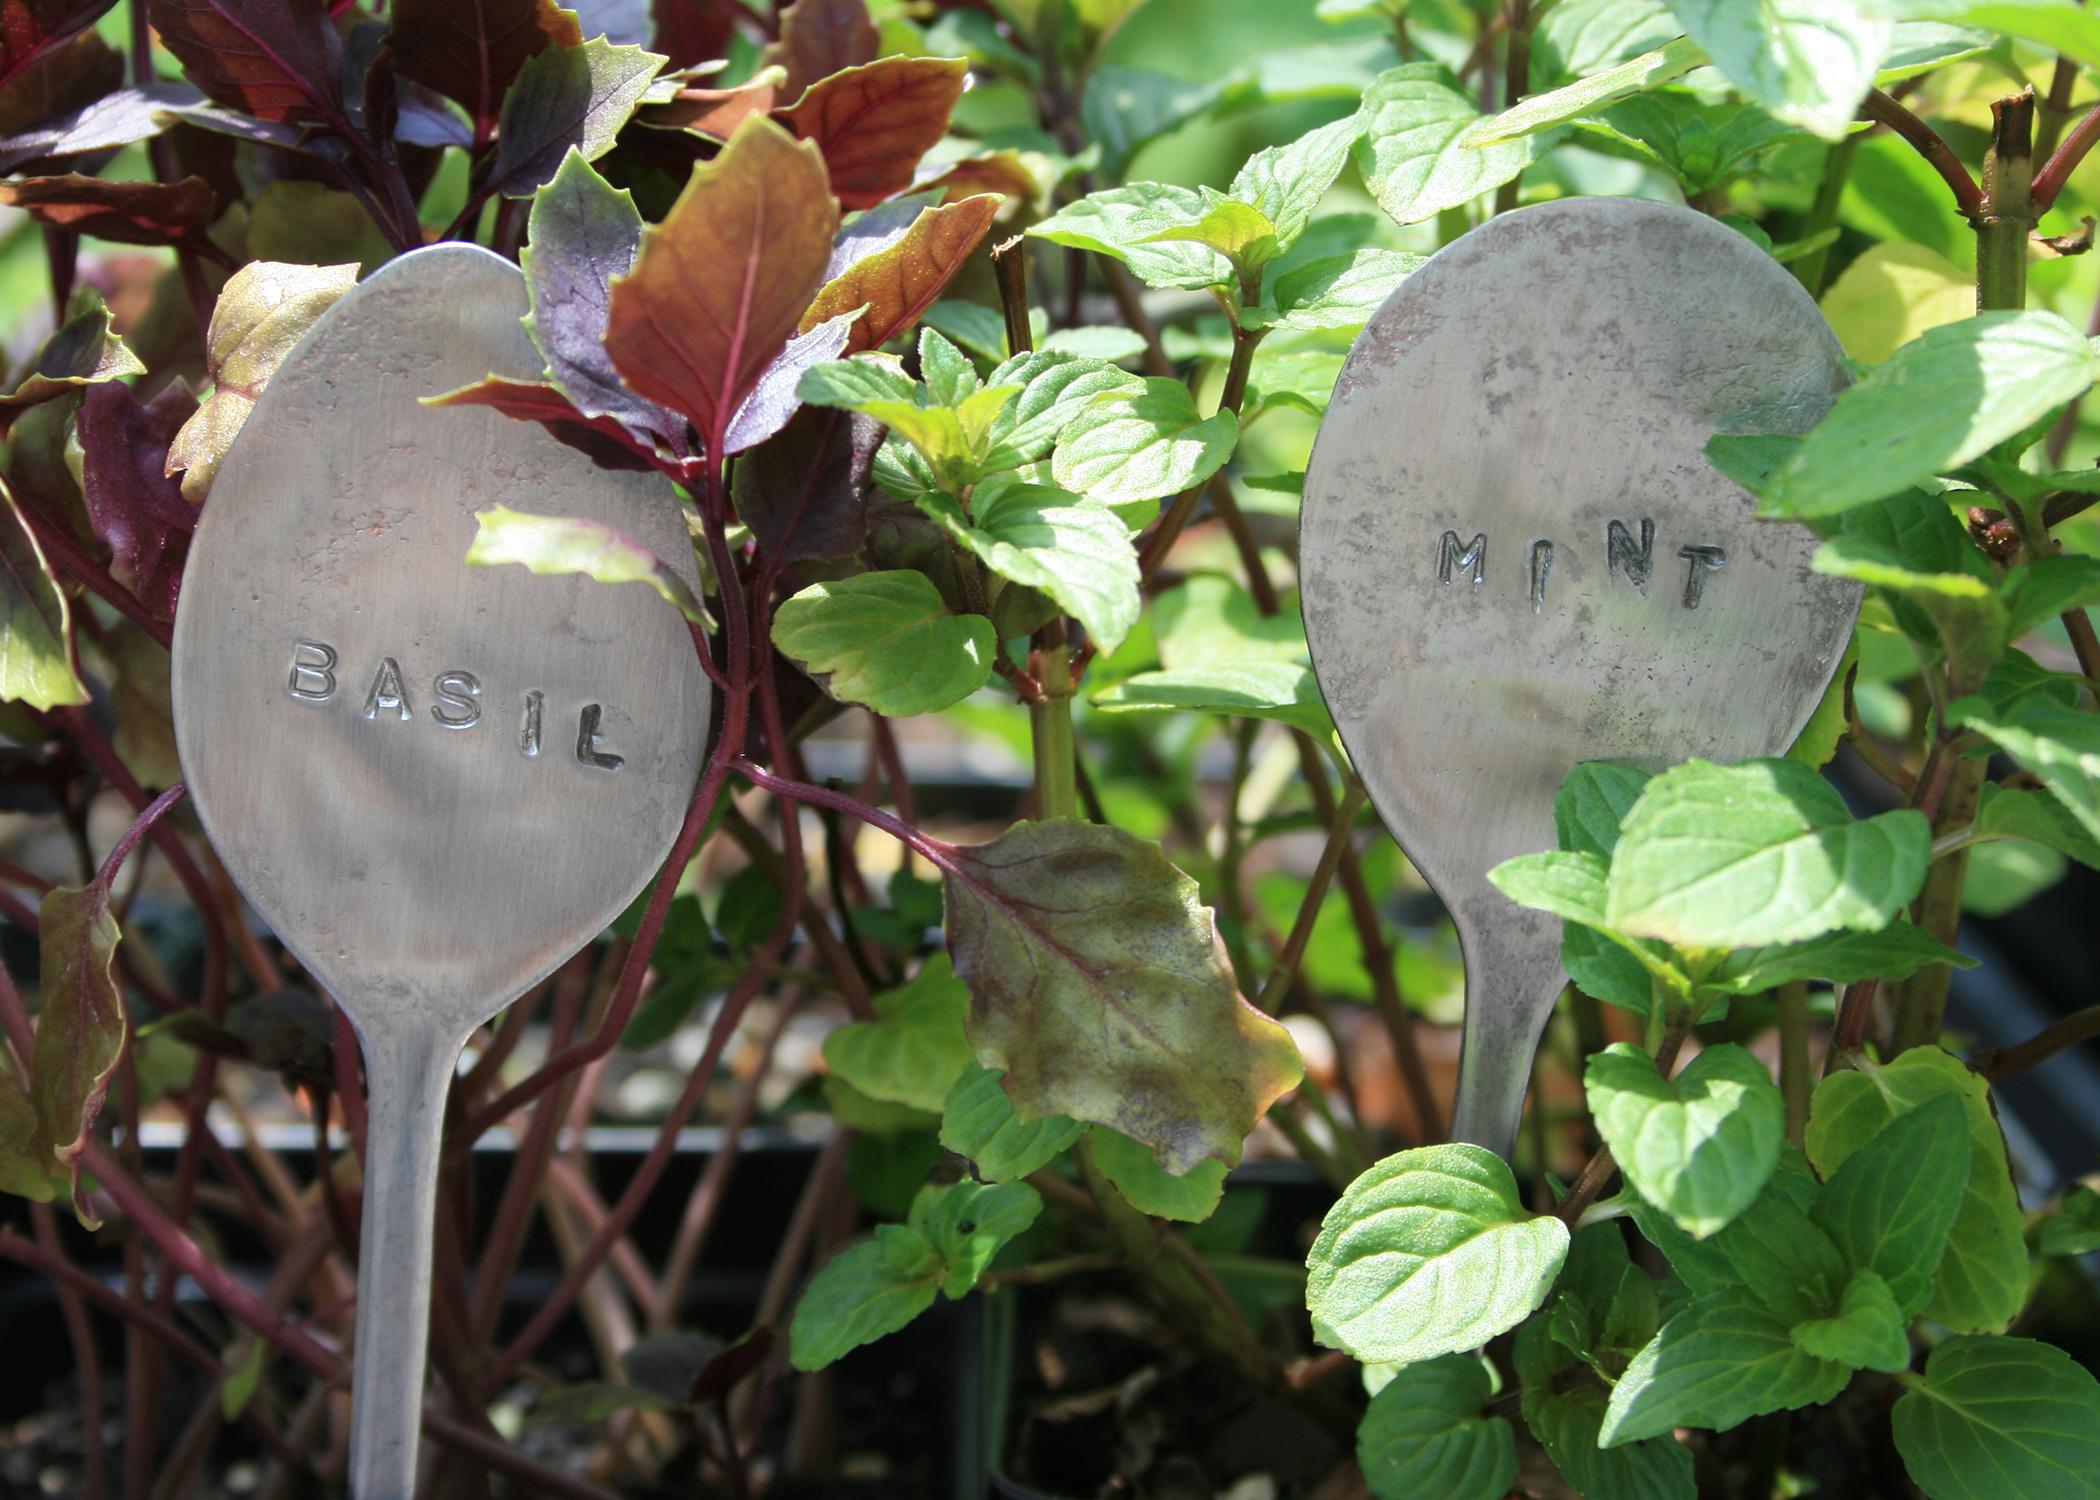 Flattened metal spoons can be customized with letter punches and placed in the garden to identify herbs. (Photo by MSU Extension Service/Gary Bachman)